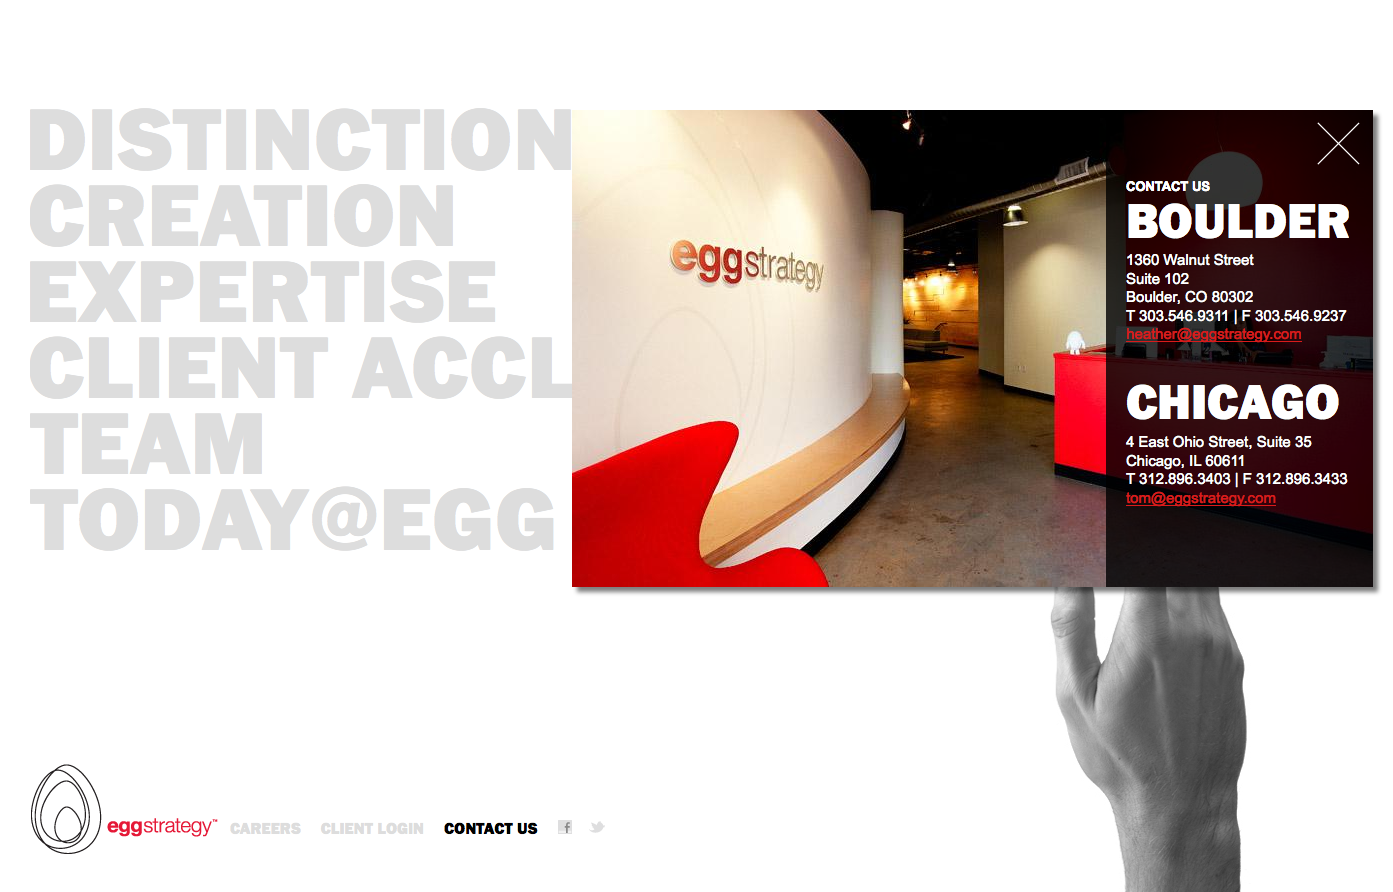 Project image 7 for Website, Egg Strategy